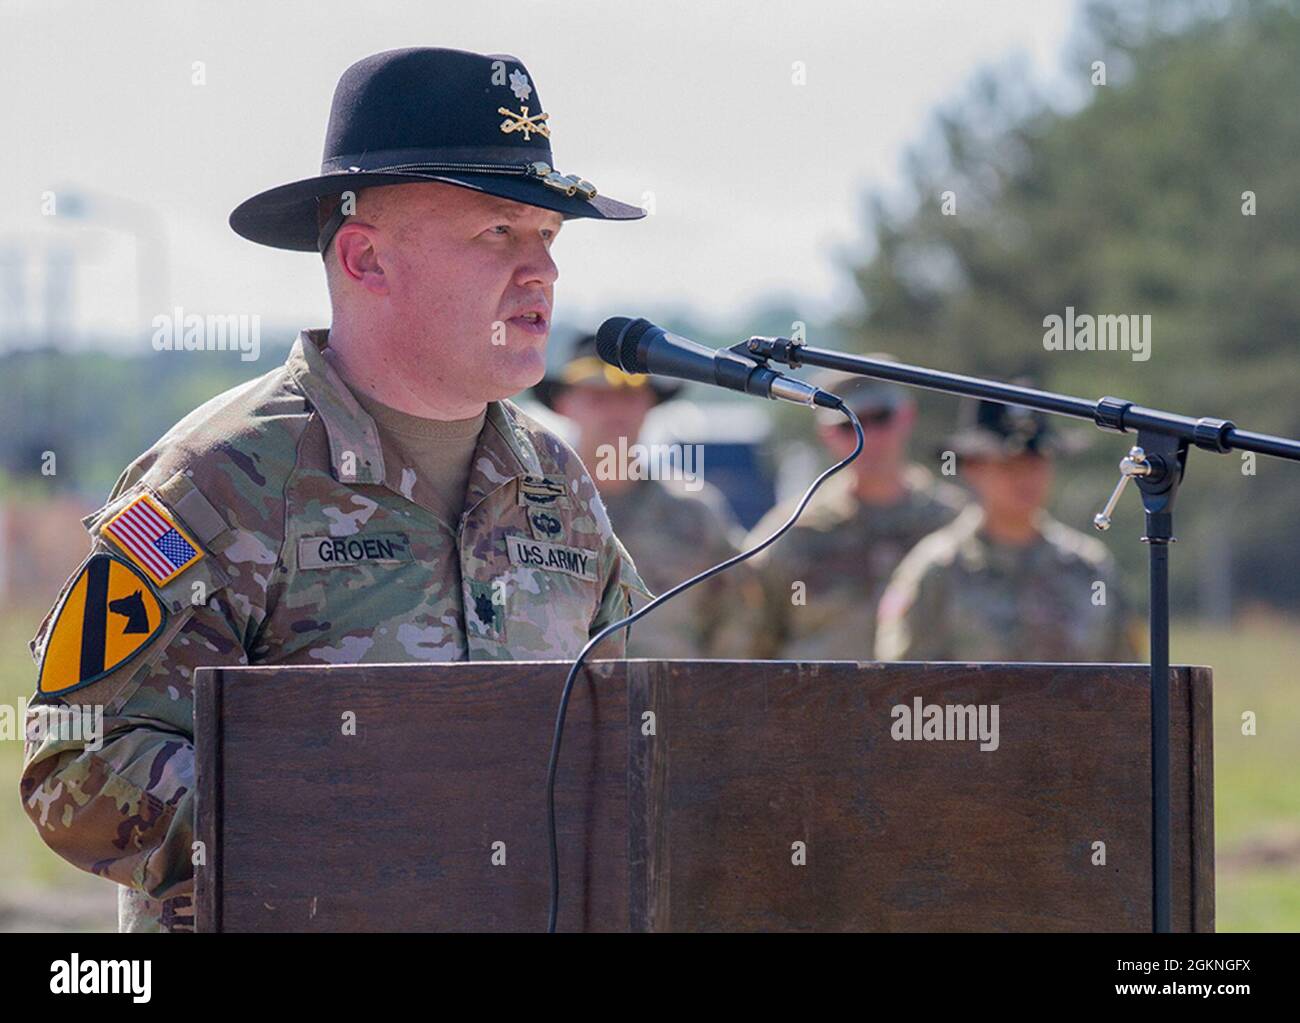 Army Lt. Col. Richard Groen, outgoing commander for 1st Squadron, 7th Cavalry Regiment “Garryowen,” gives his farewell address to his Soldiers and distinguished guests during a change of command ceremony at Forward Operating Site Drawsko Pomorskie Training Area, Poland, on June 5, 2021. Groen will soon take command of 3rd Squadron, 3rd Security Force Assistance Brigade. Stock Photo